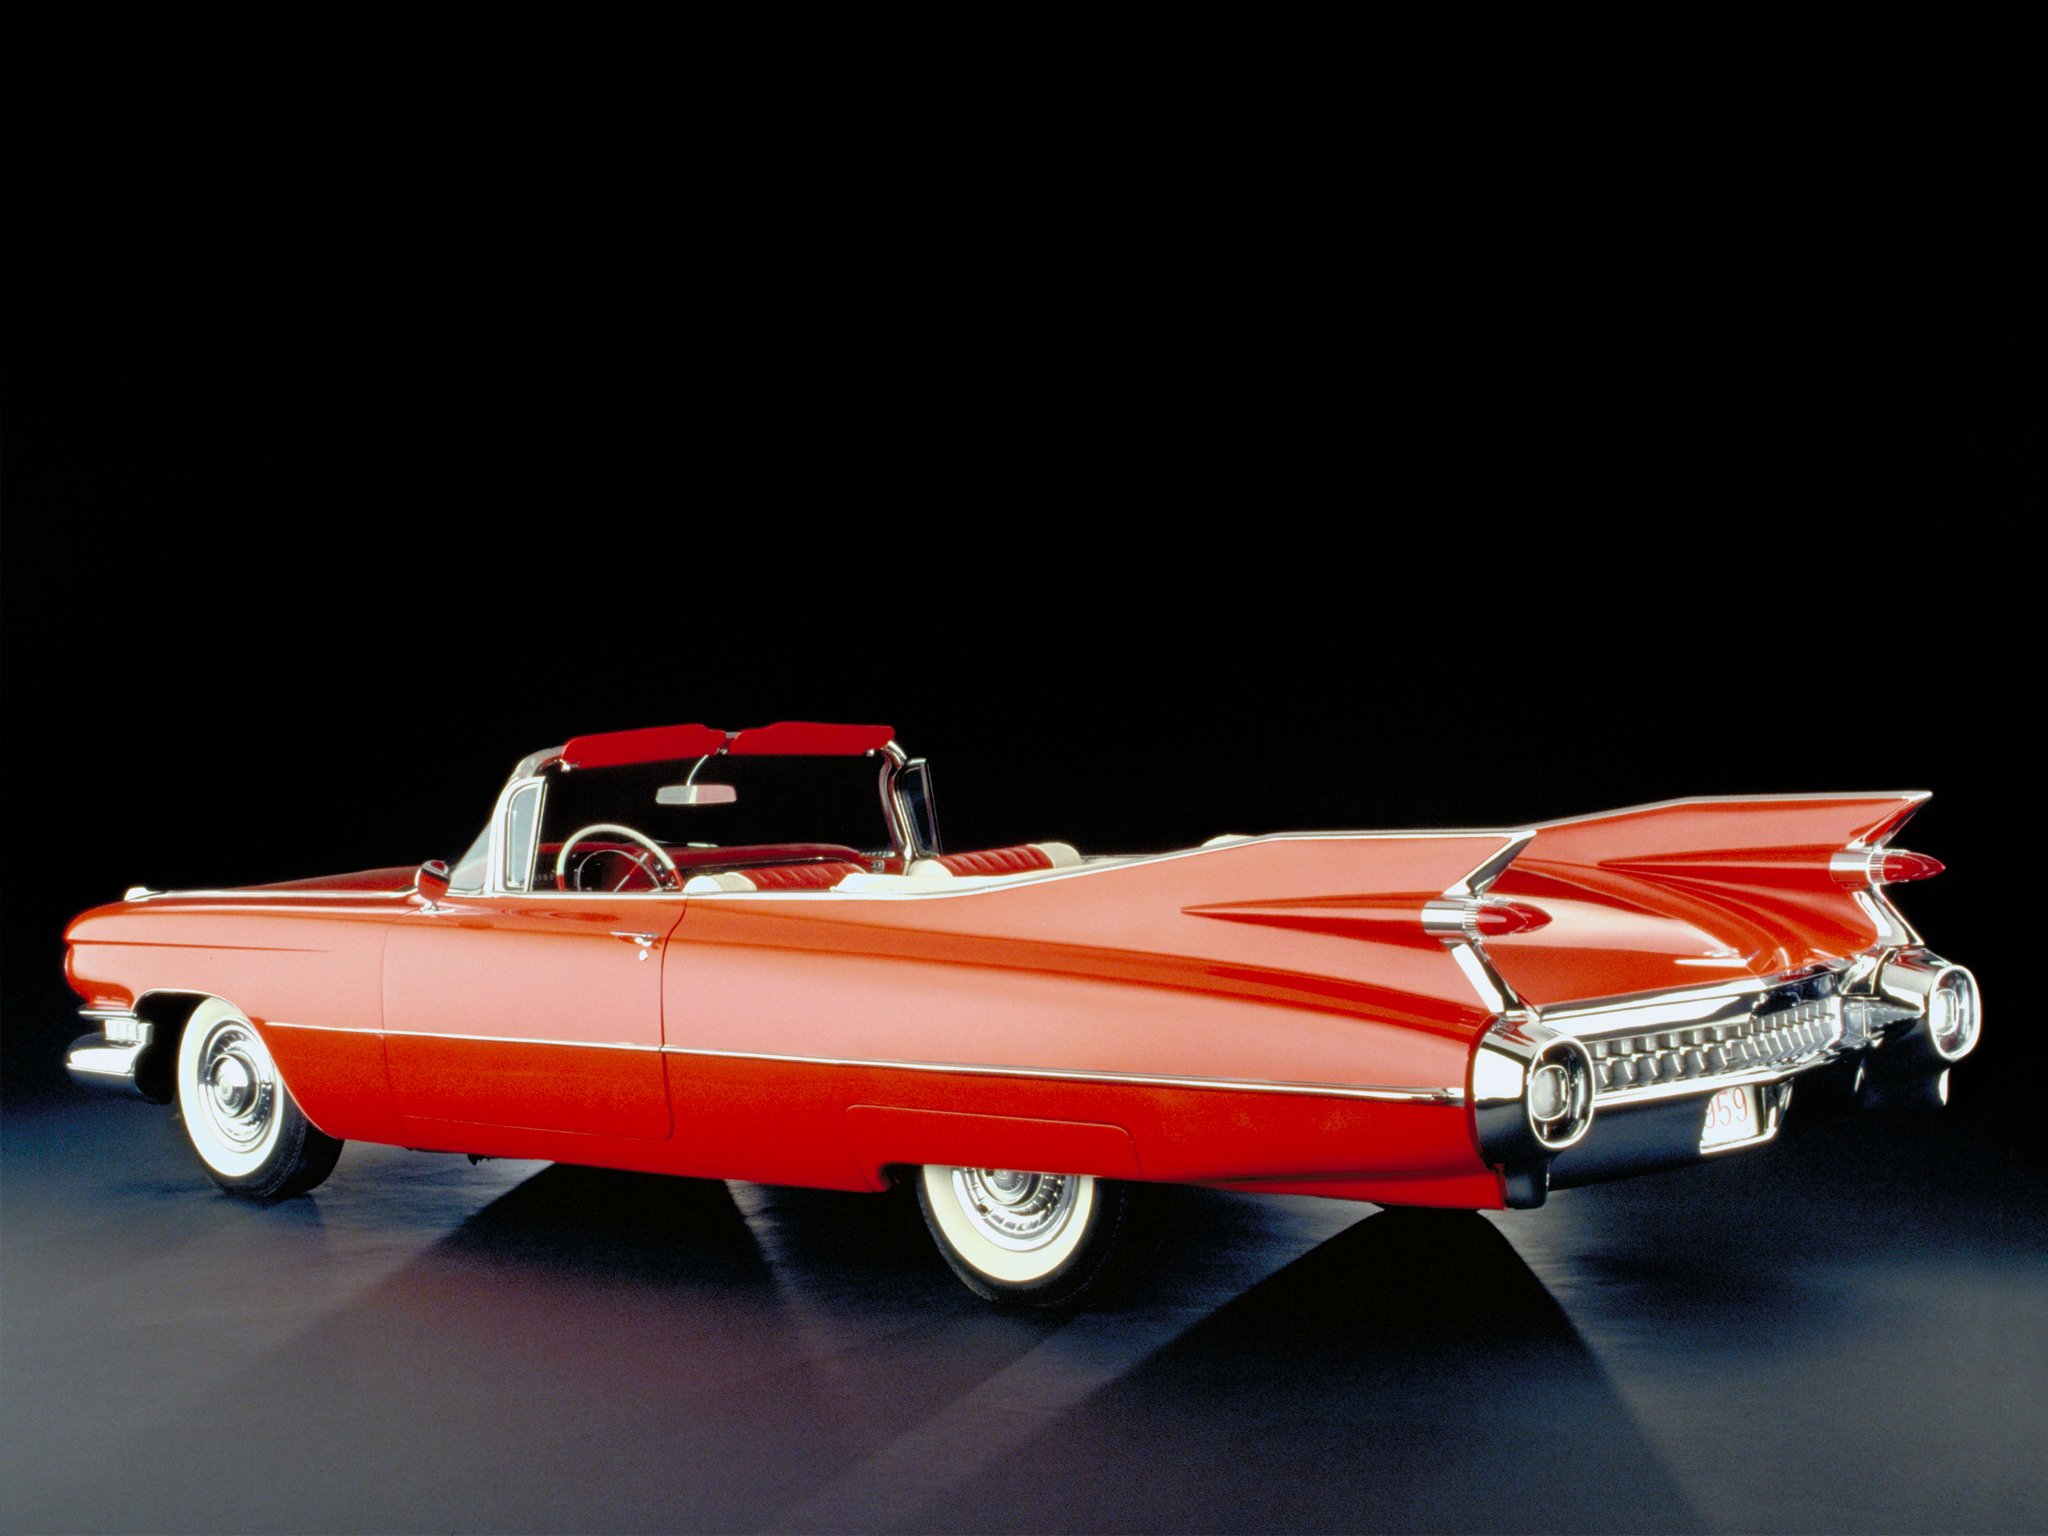 1959, Cadillac, Sixty two, Convertible,  6267f , Luxury, Retro Wallpaper